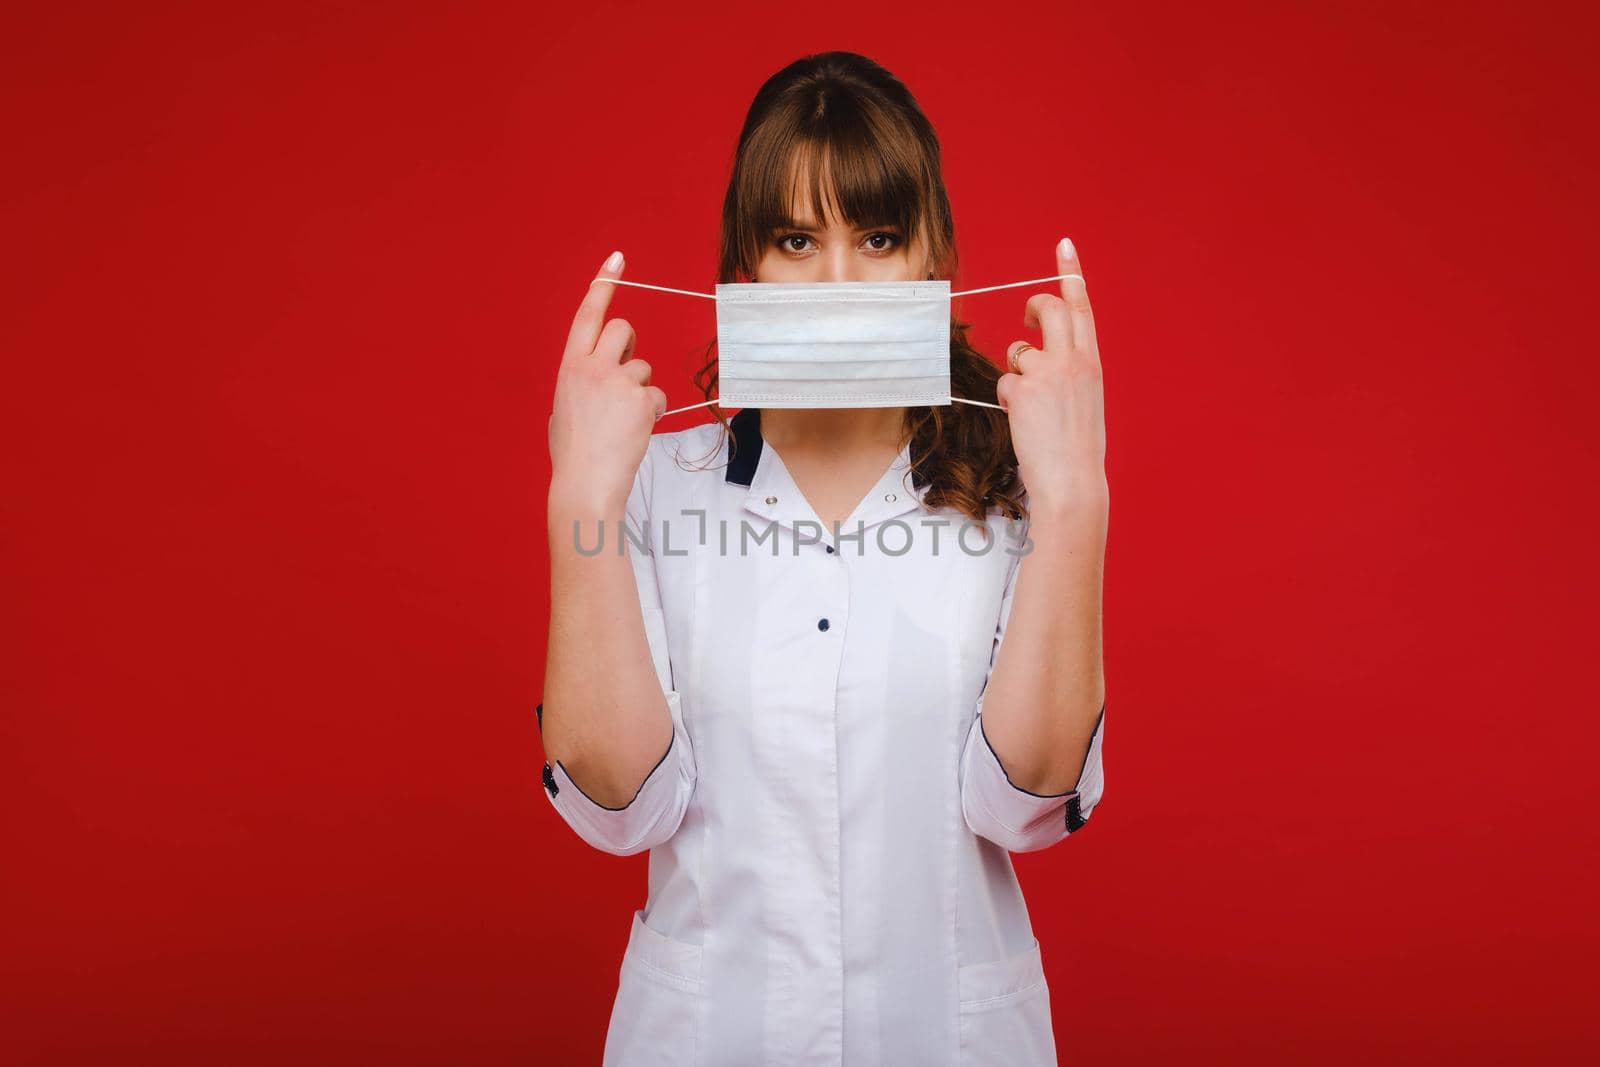 A female doctor stands in a medical mask isolated on a red background